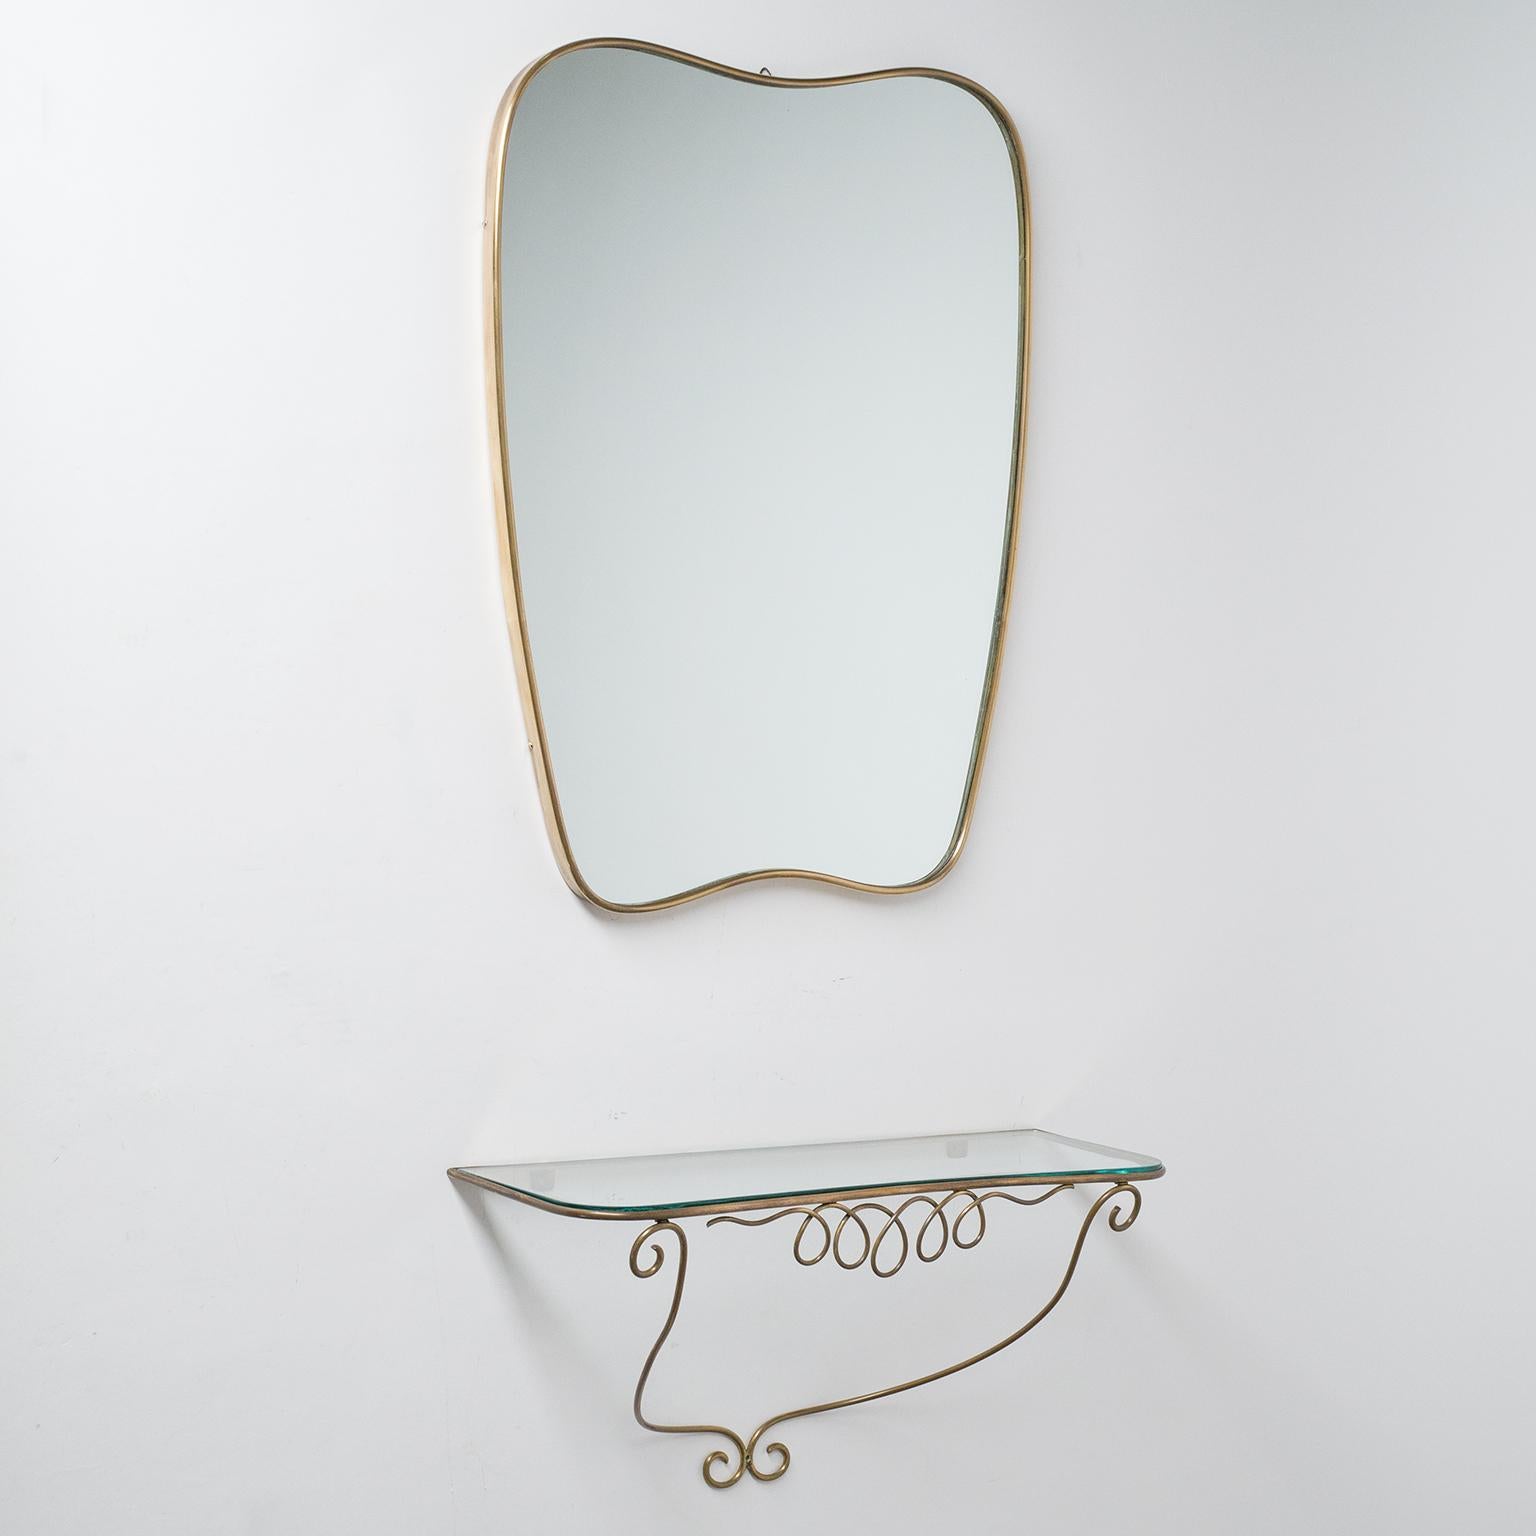 Italian brass mirror and console in the style of Gio Ponti, circa 1950. 
Measures: Mirror height 23inches/59cm, width 18inches/45cm, depth 1inch/2.5cm; Console height 11inches/27cm, width 20inches/51cm, depth 7inches/18cm.